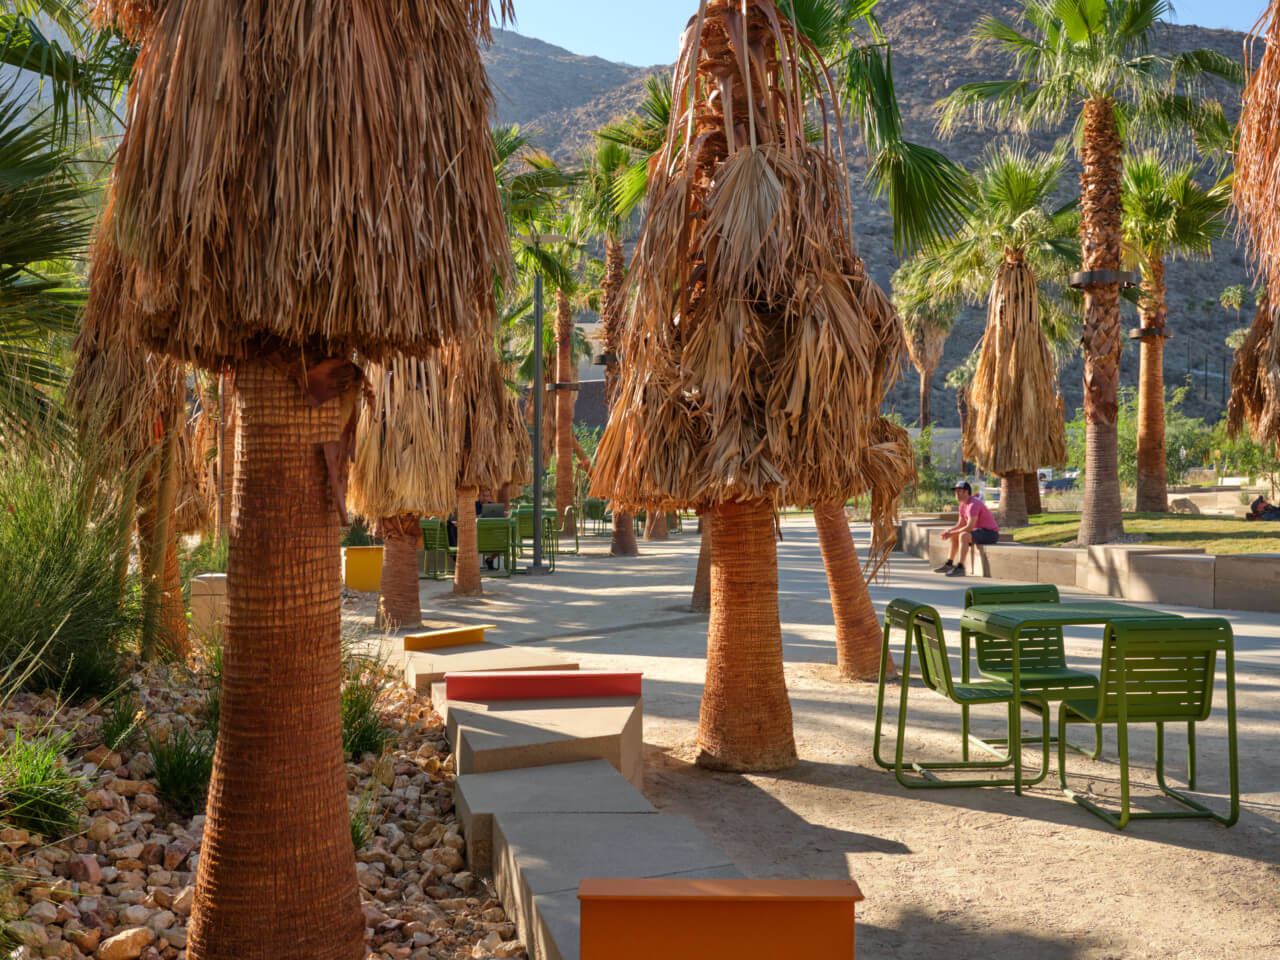 seating in a palm-tree lined park